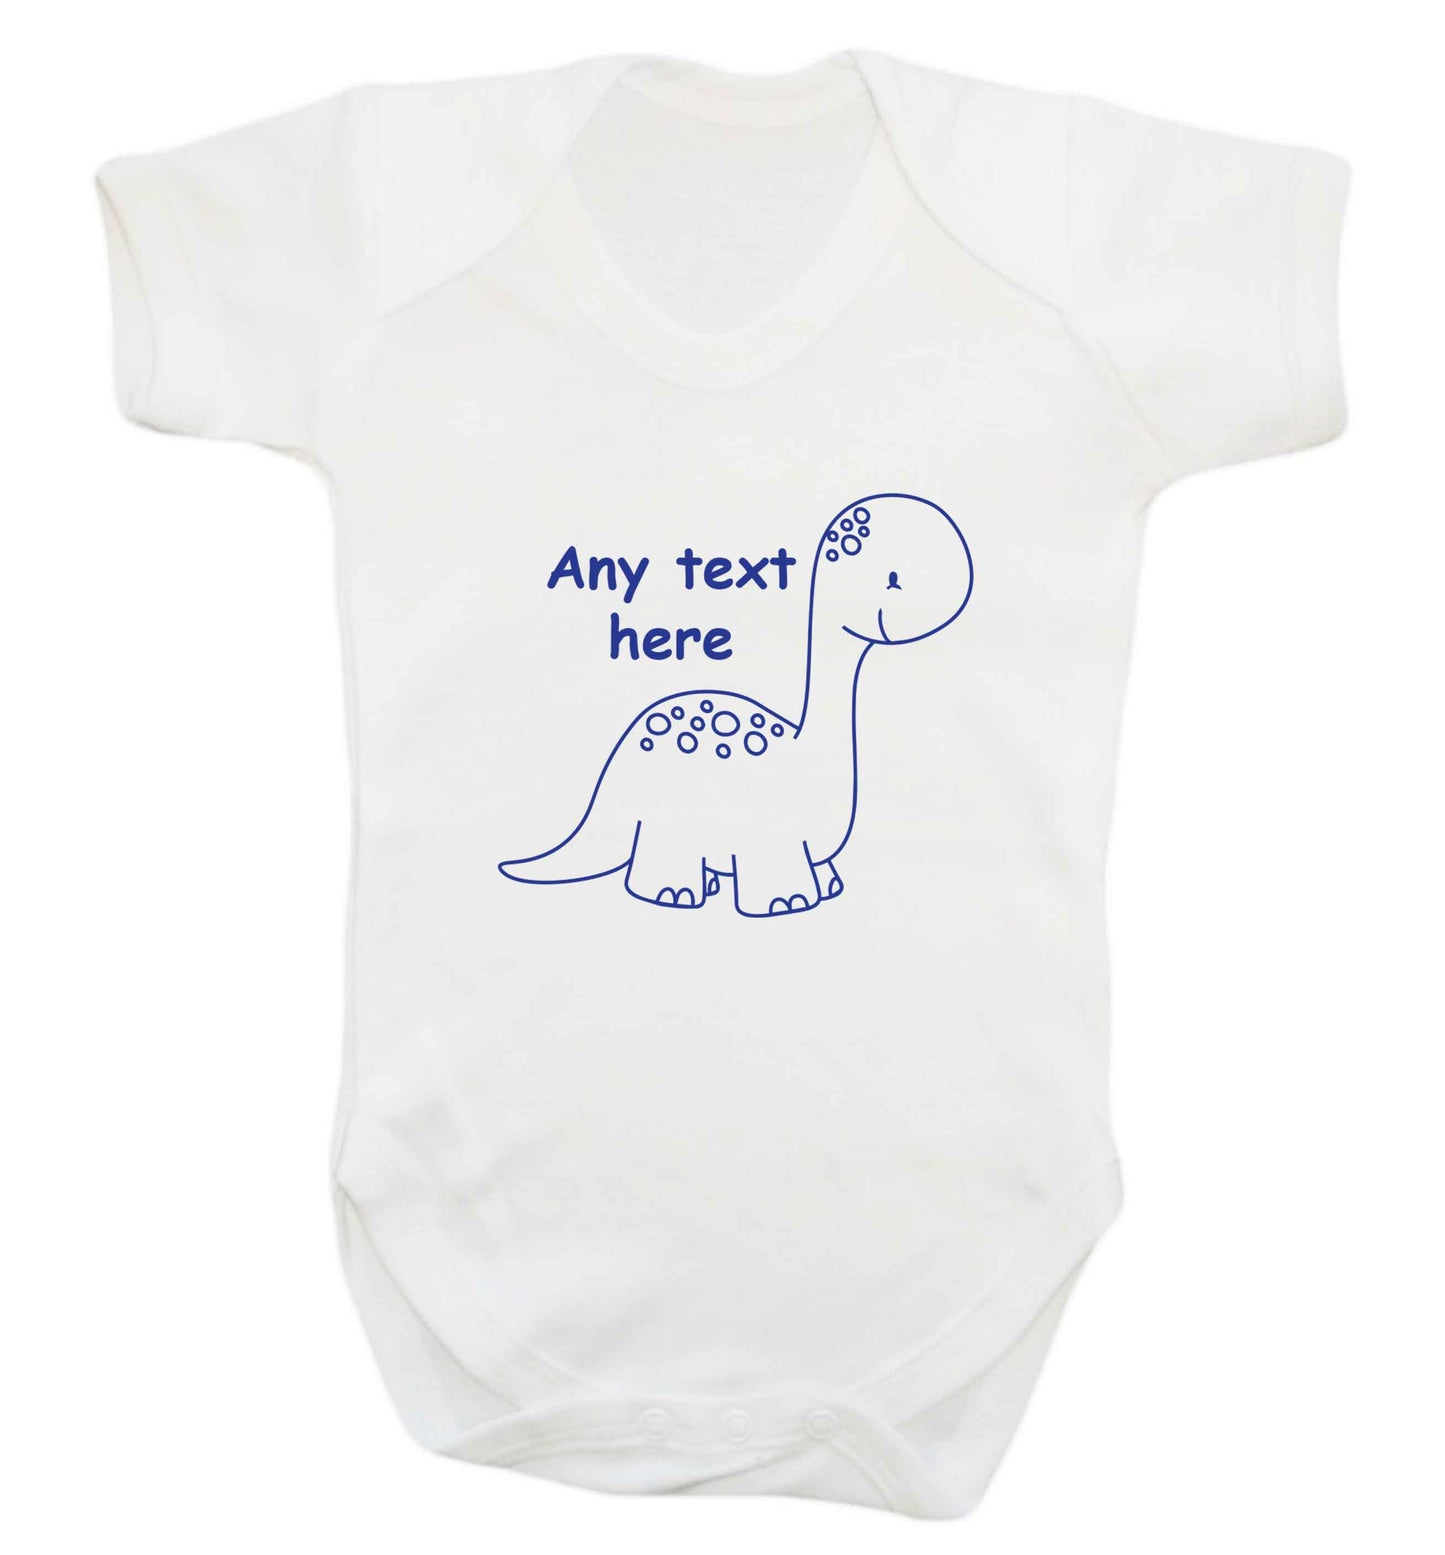 Dinosaur any text baby vest white 18-24 months